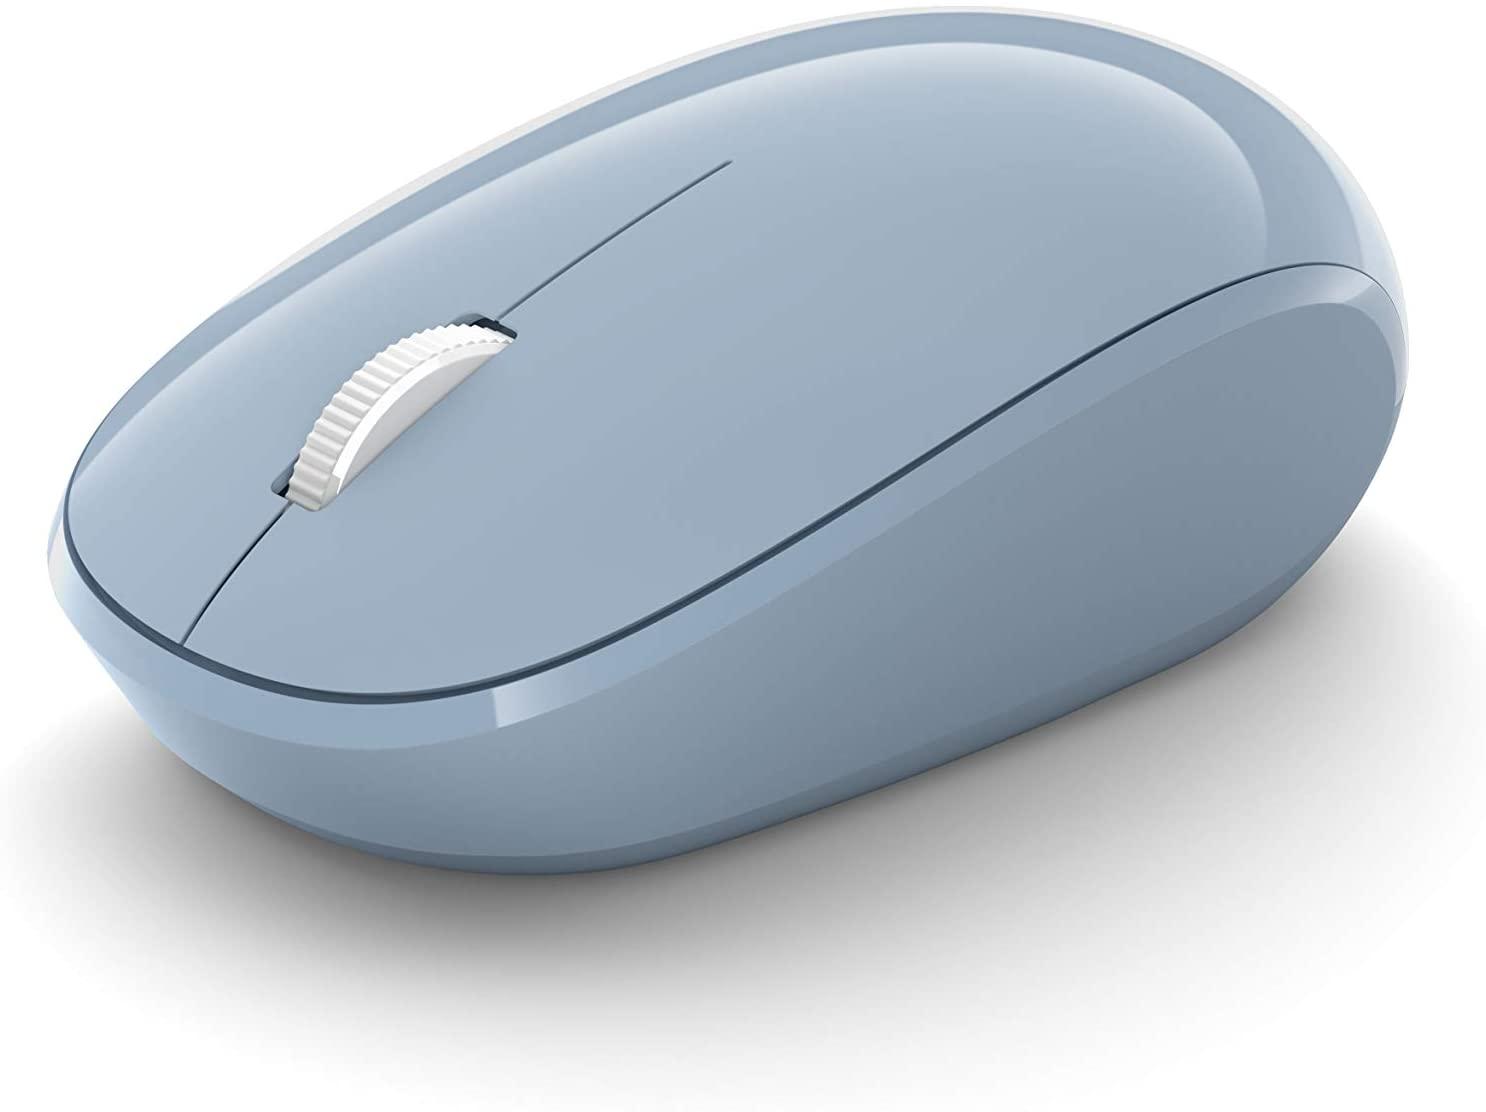 Microsoft Bluetooth Mouse for $11.99